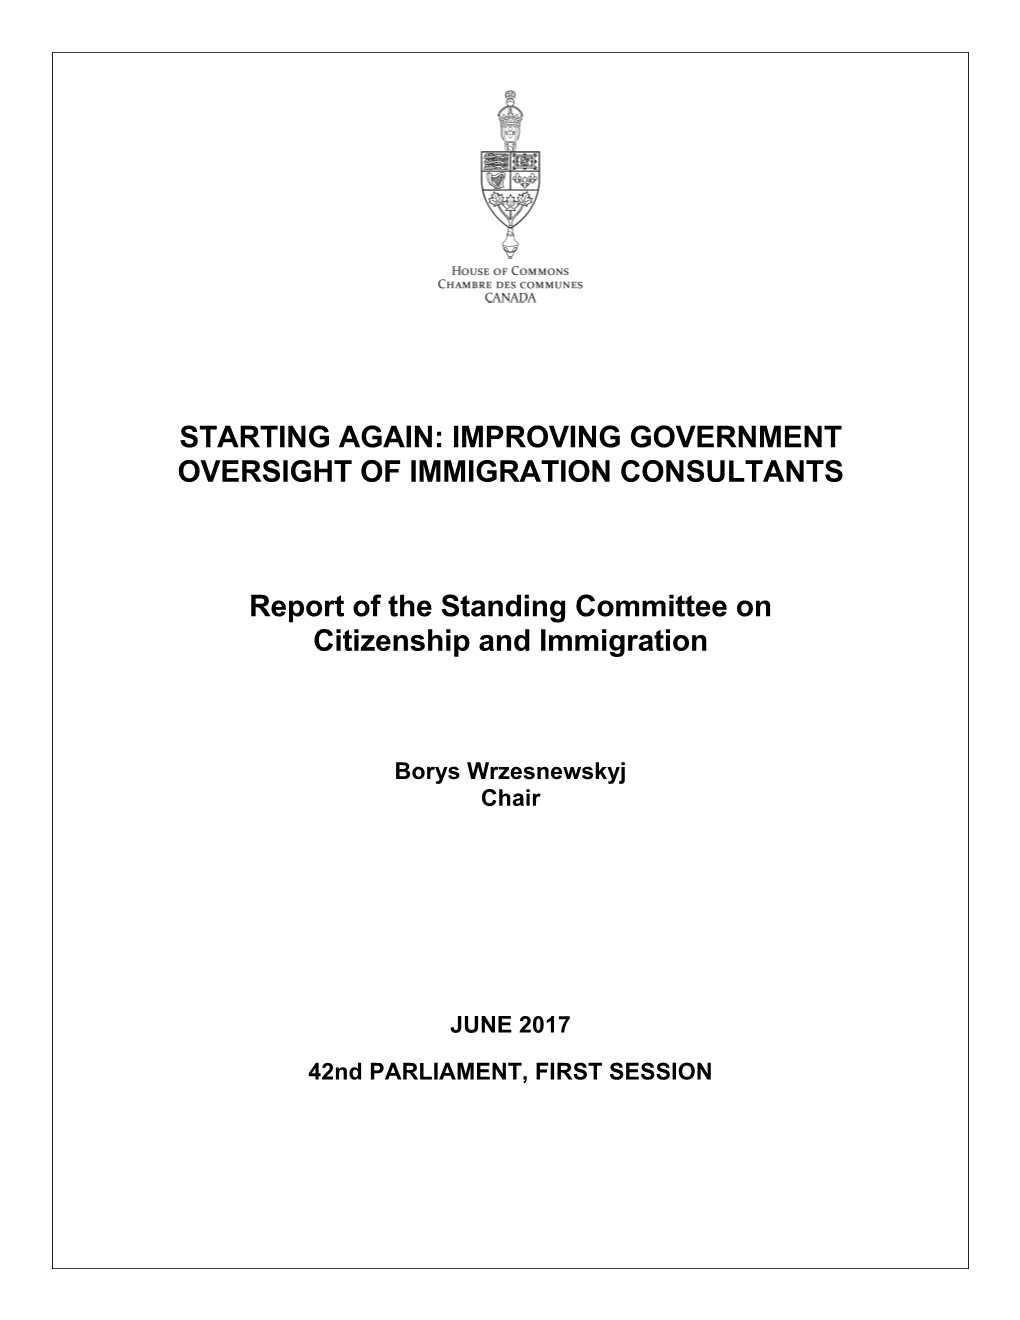 Standing Committee on Citizenship and Immigration